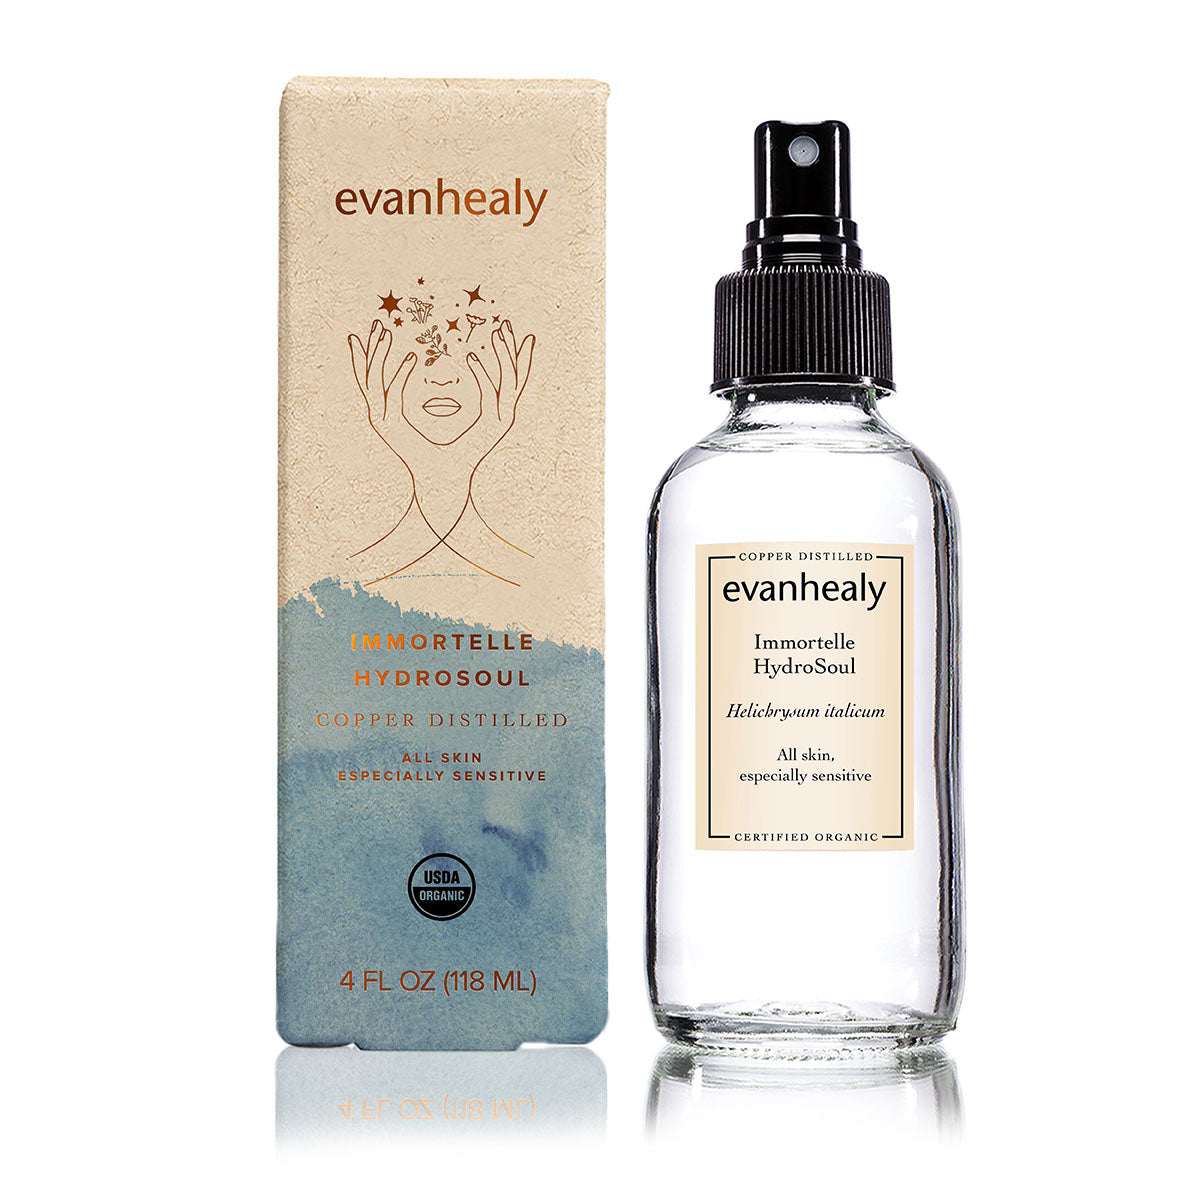 evanhealy immortelle hydrosol in glass jar with blue product box